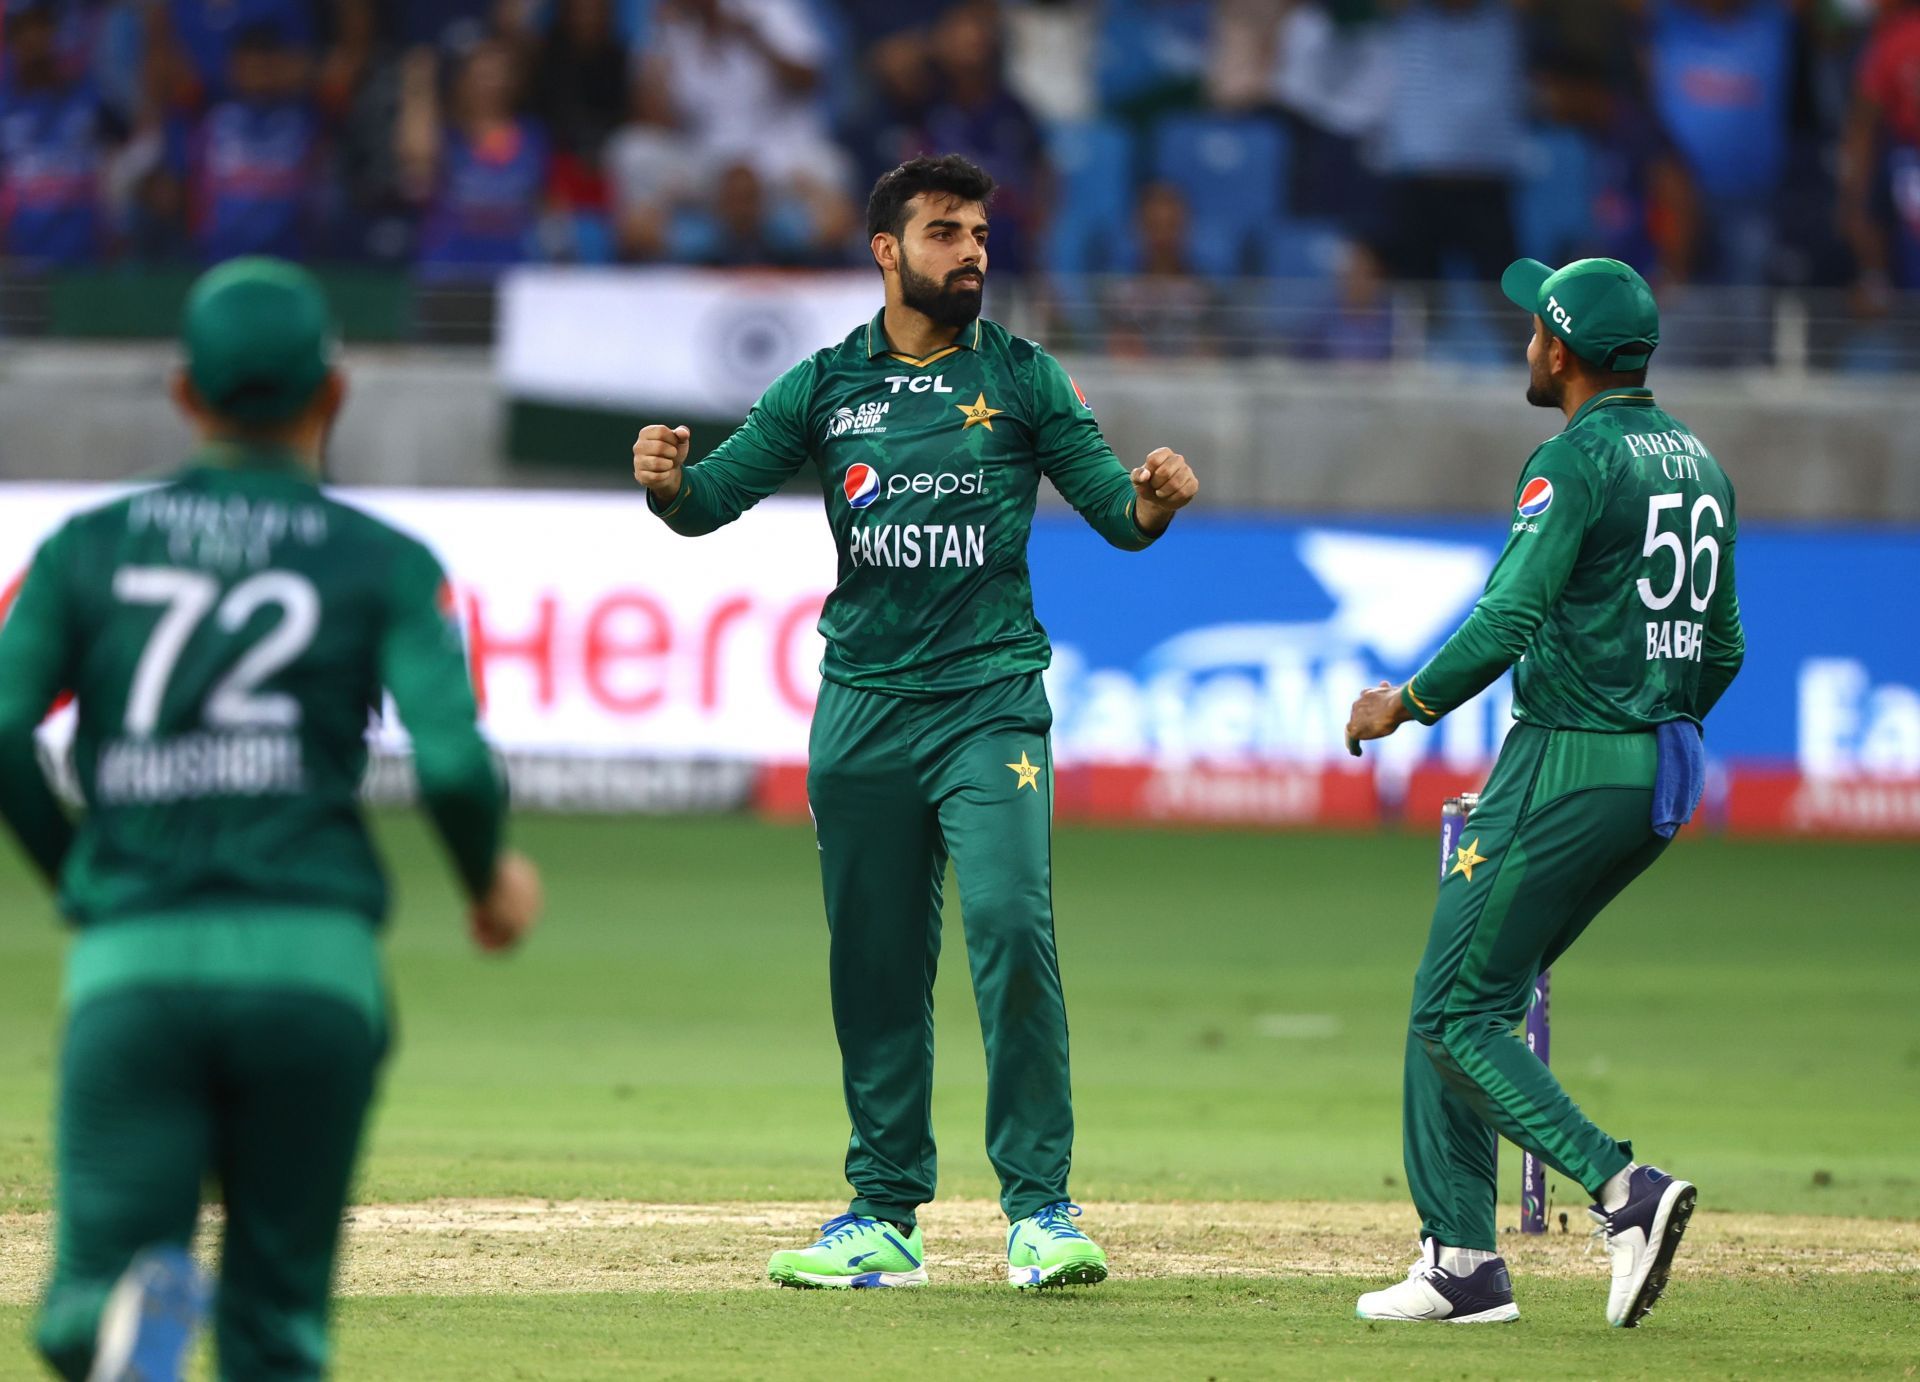 Shadab Khan was the best bowler for Pakistan tonight. (Image: Getty)